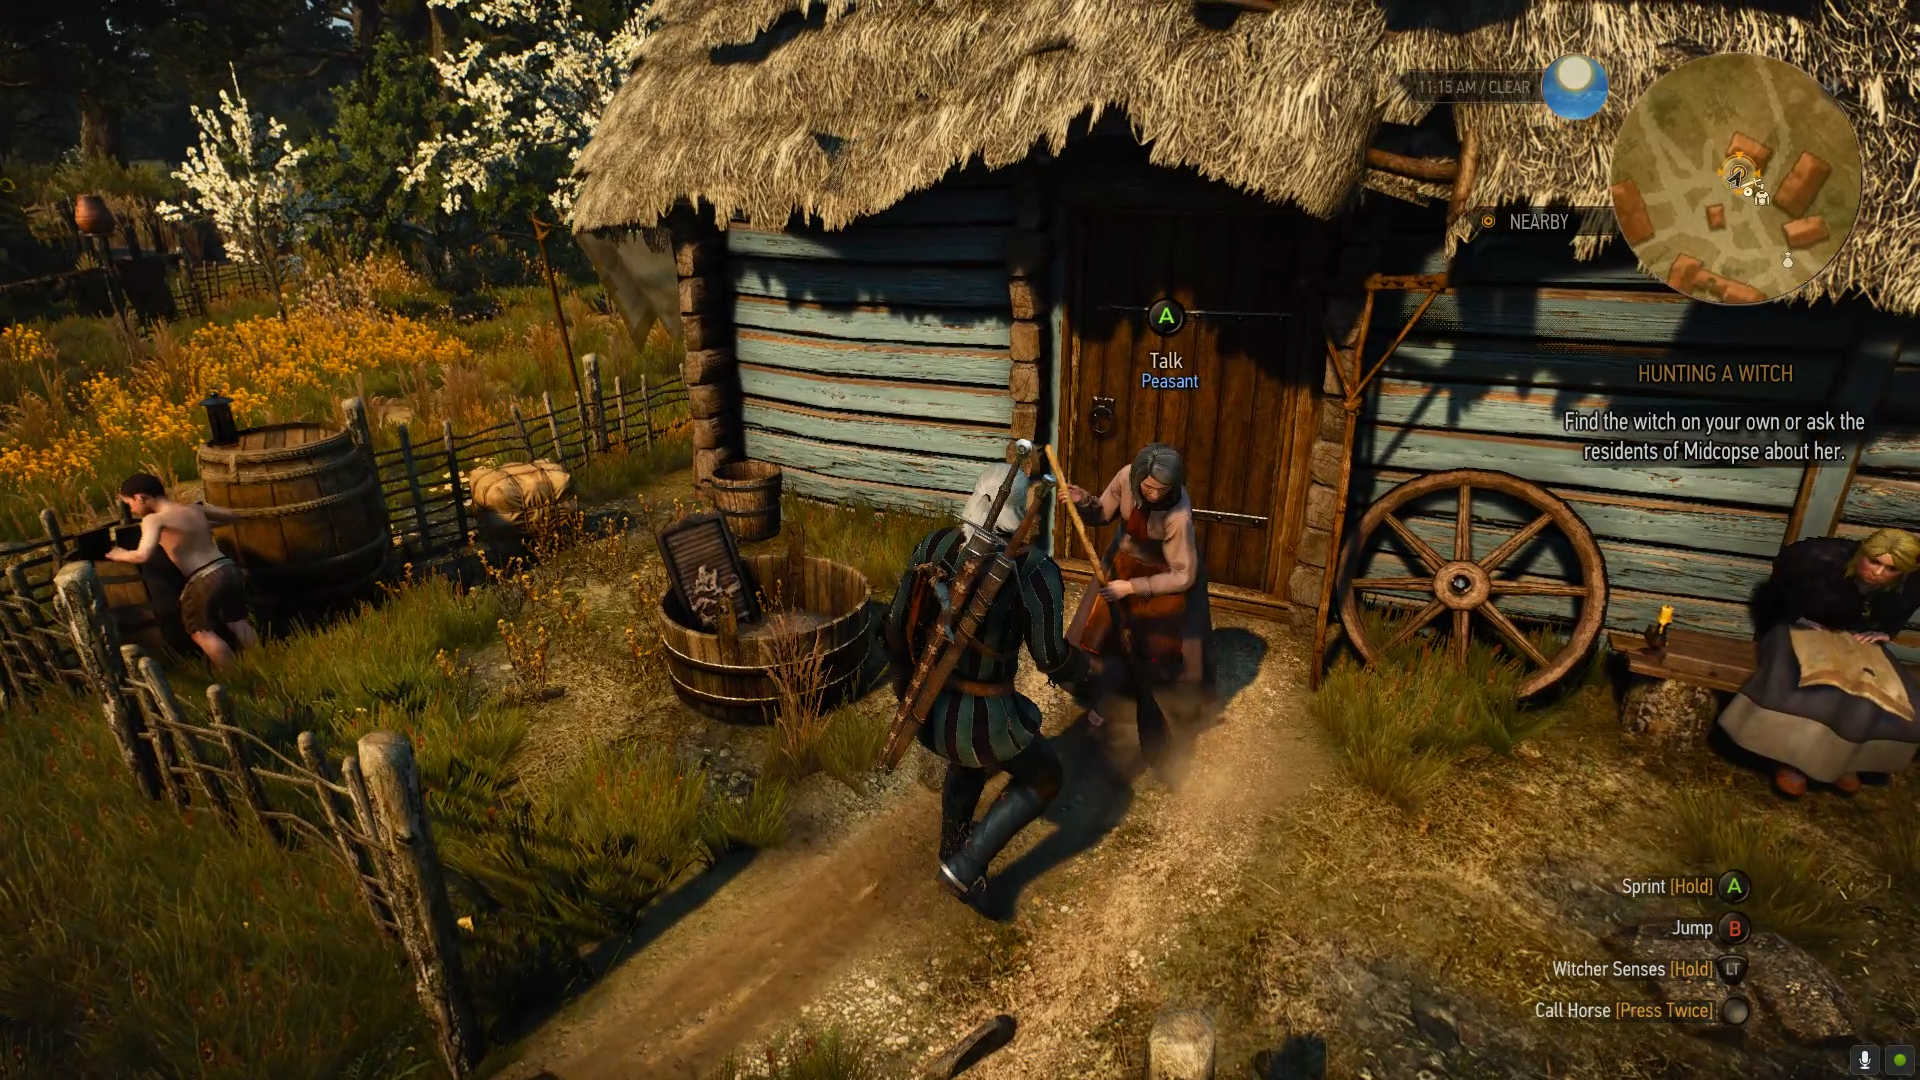 The Witcher 3 Strategy：Hunting a Witch (Main Quest) – Velen